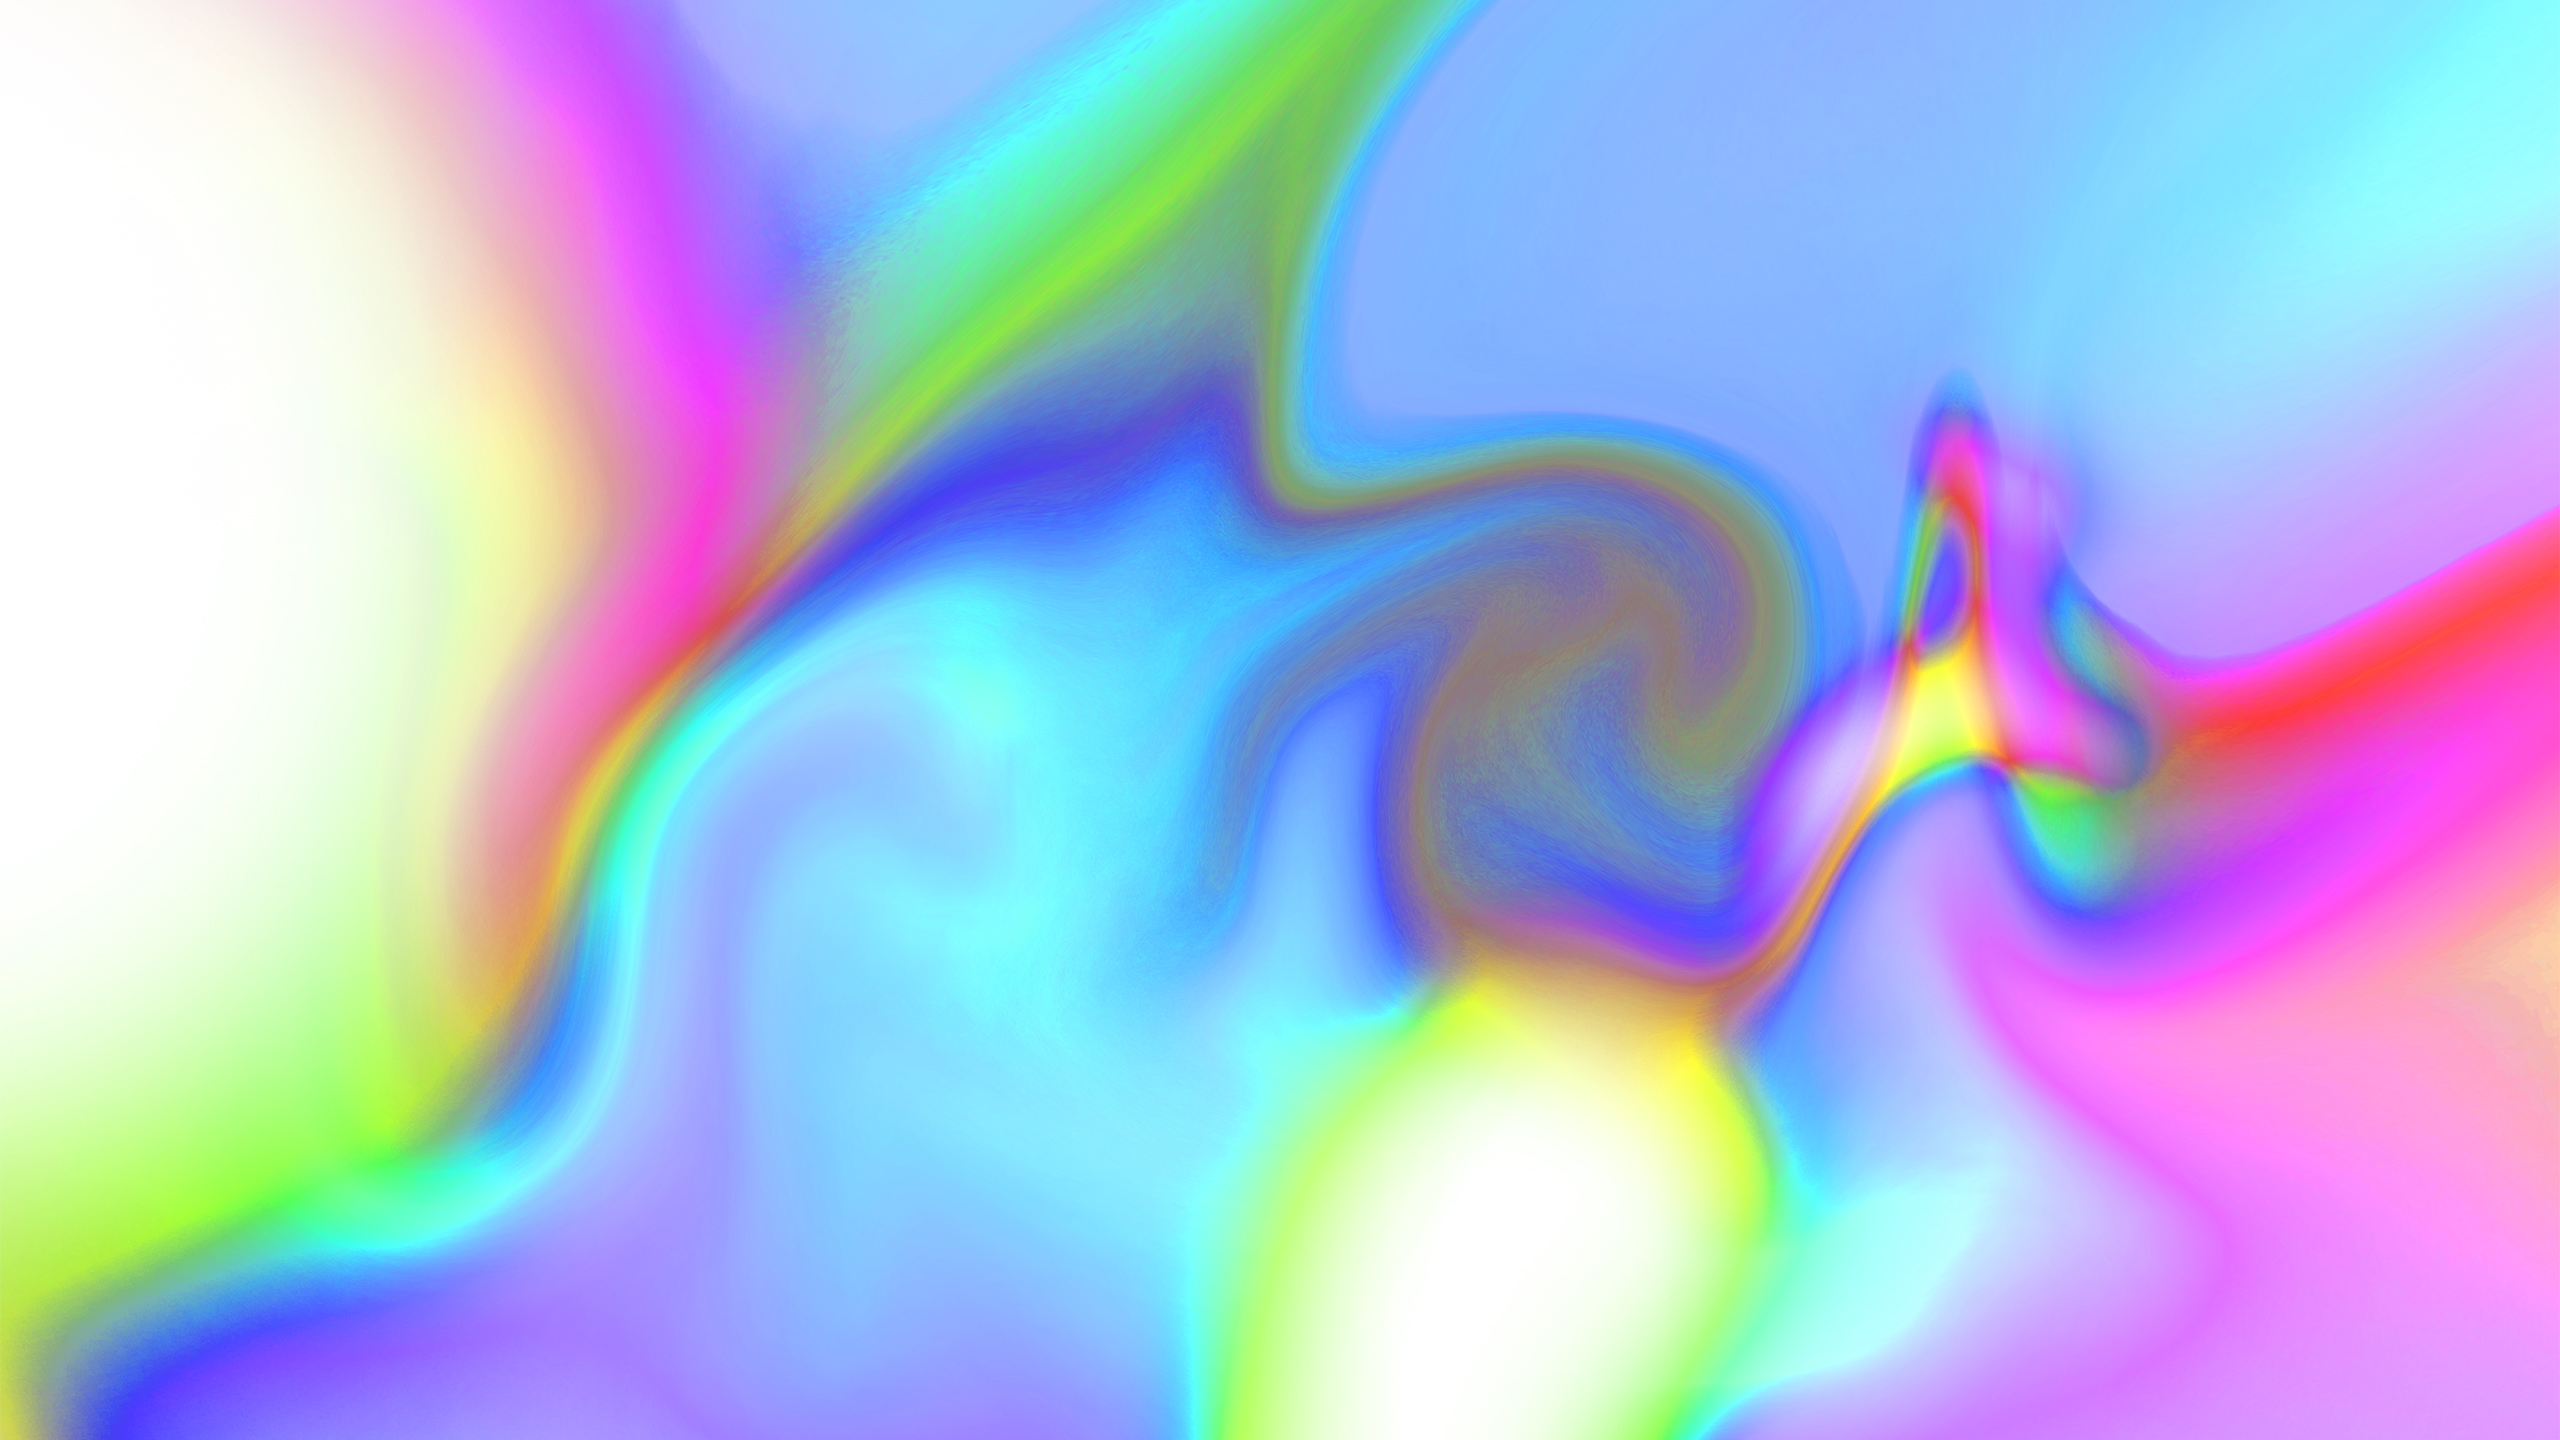 Abstract Photoshop Colorful Holographic Iridescent Liquid Gradient Graphic Design 2560x1440